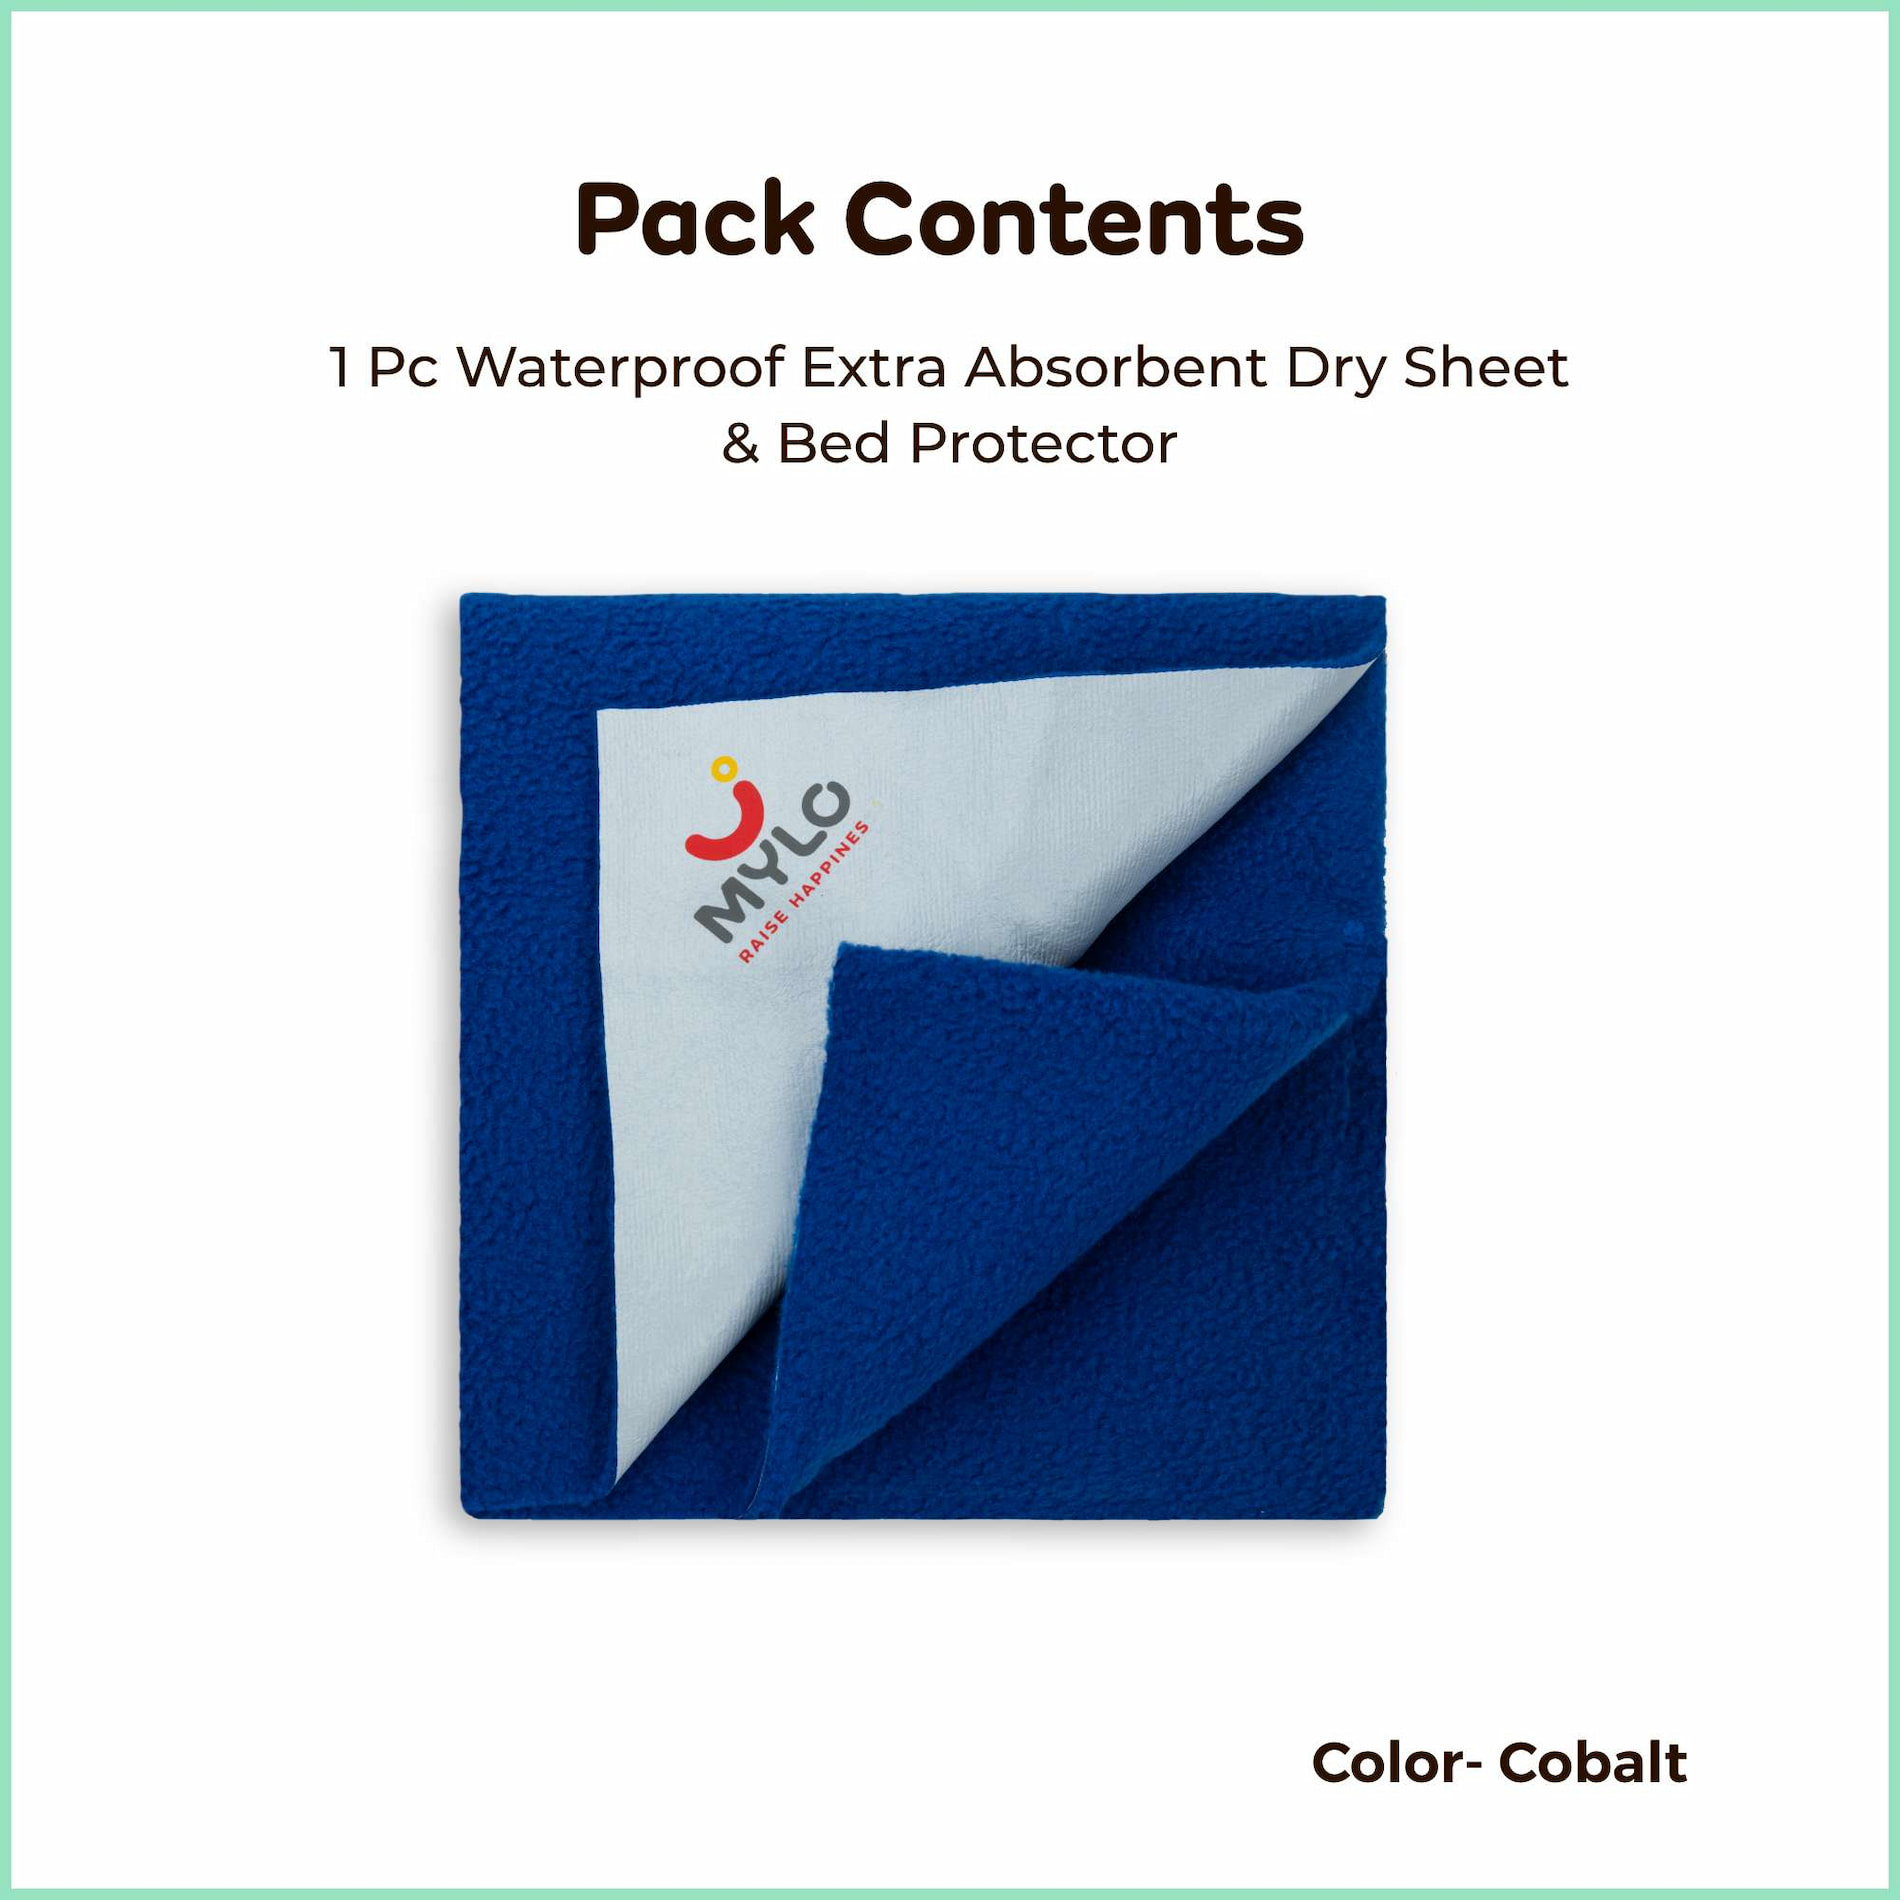 Waterproof Extra Absorbent Dry Sheet & Bed Protector - Cobalt (L) 